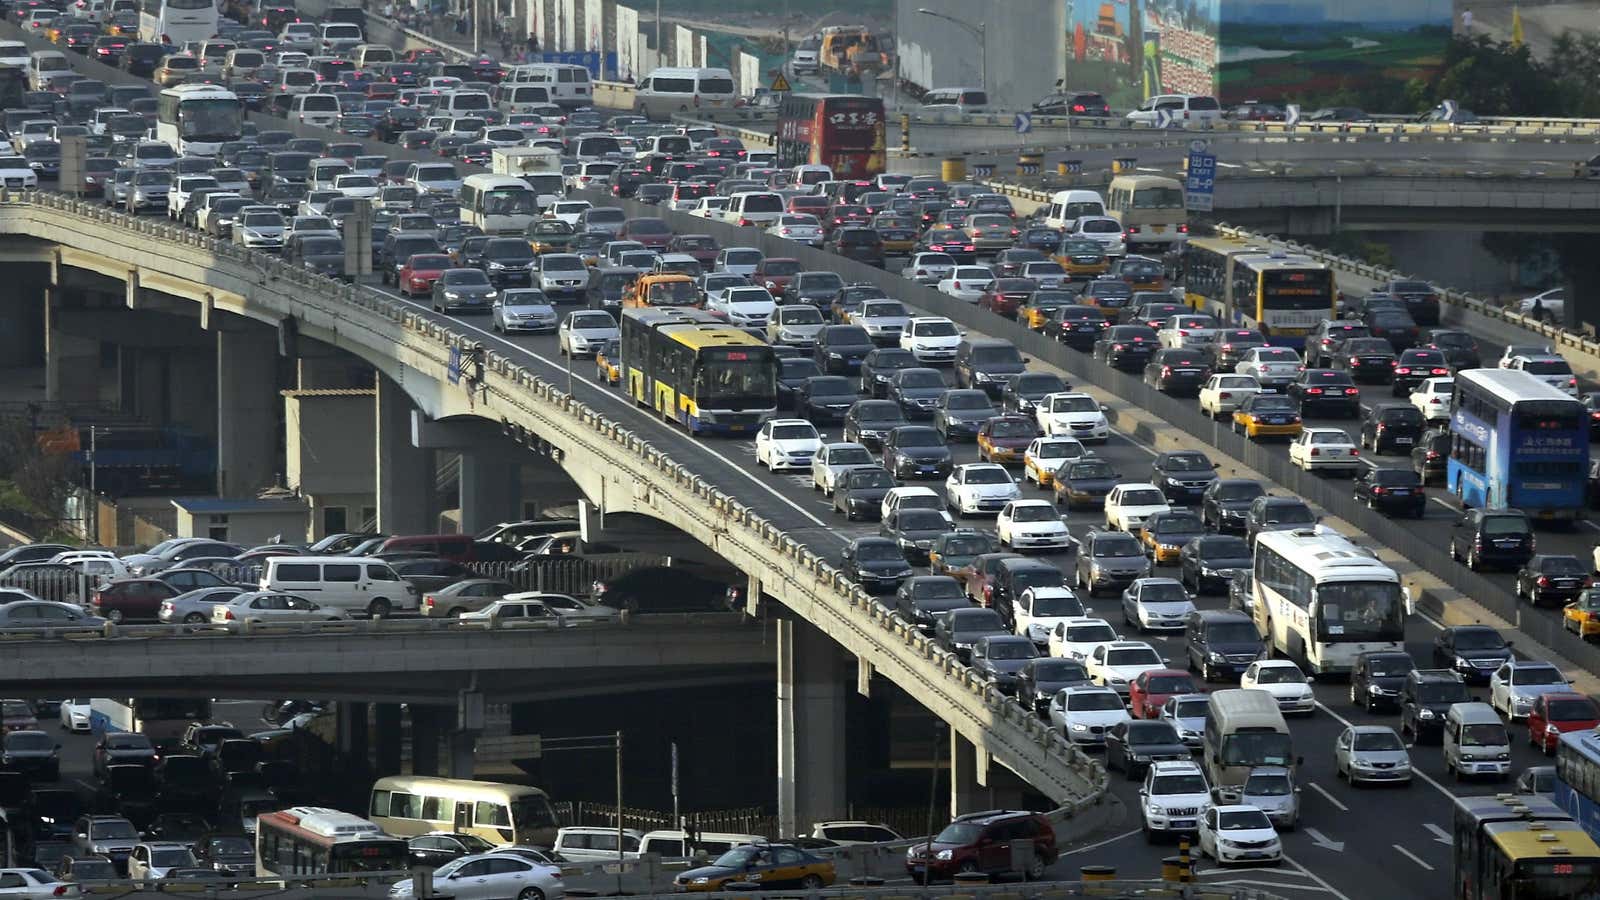 At this rate, Beijing’s traffic is never going to improve.